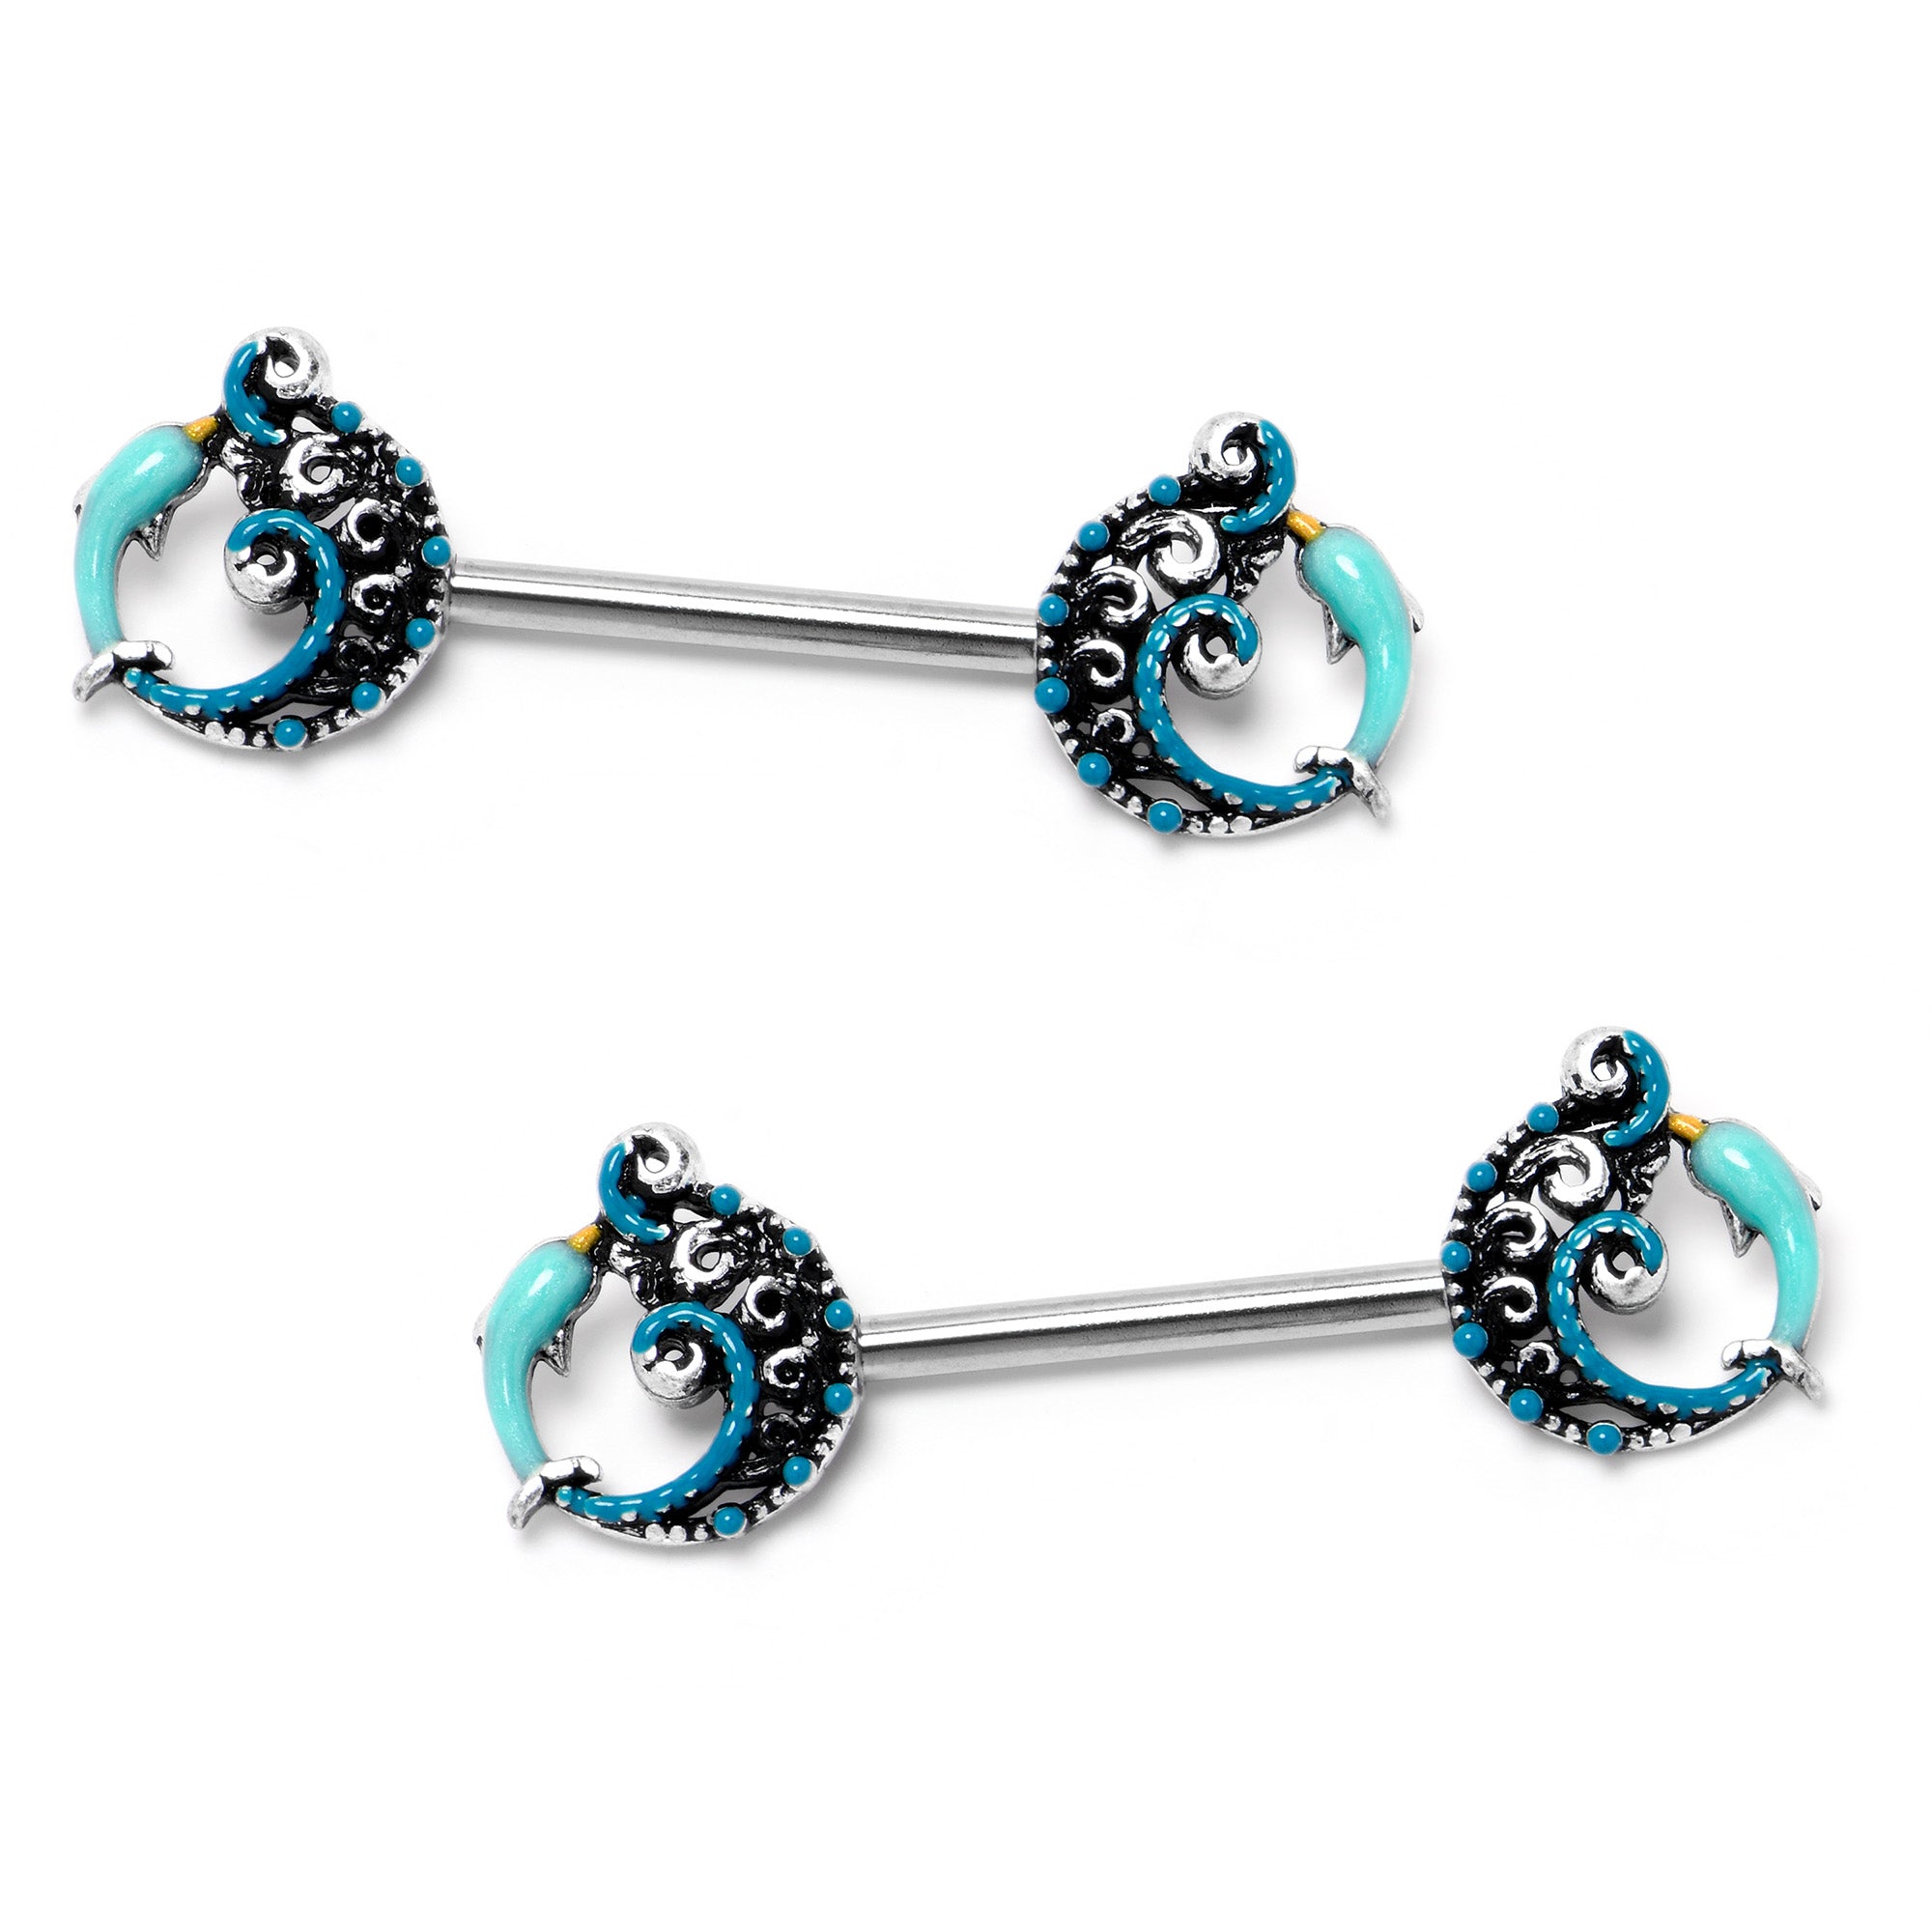 14 Gauge 9/16 Leaping Blue Dolphin Barbell Nipple Ring Set